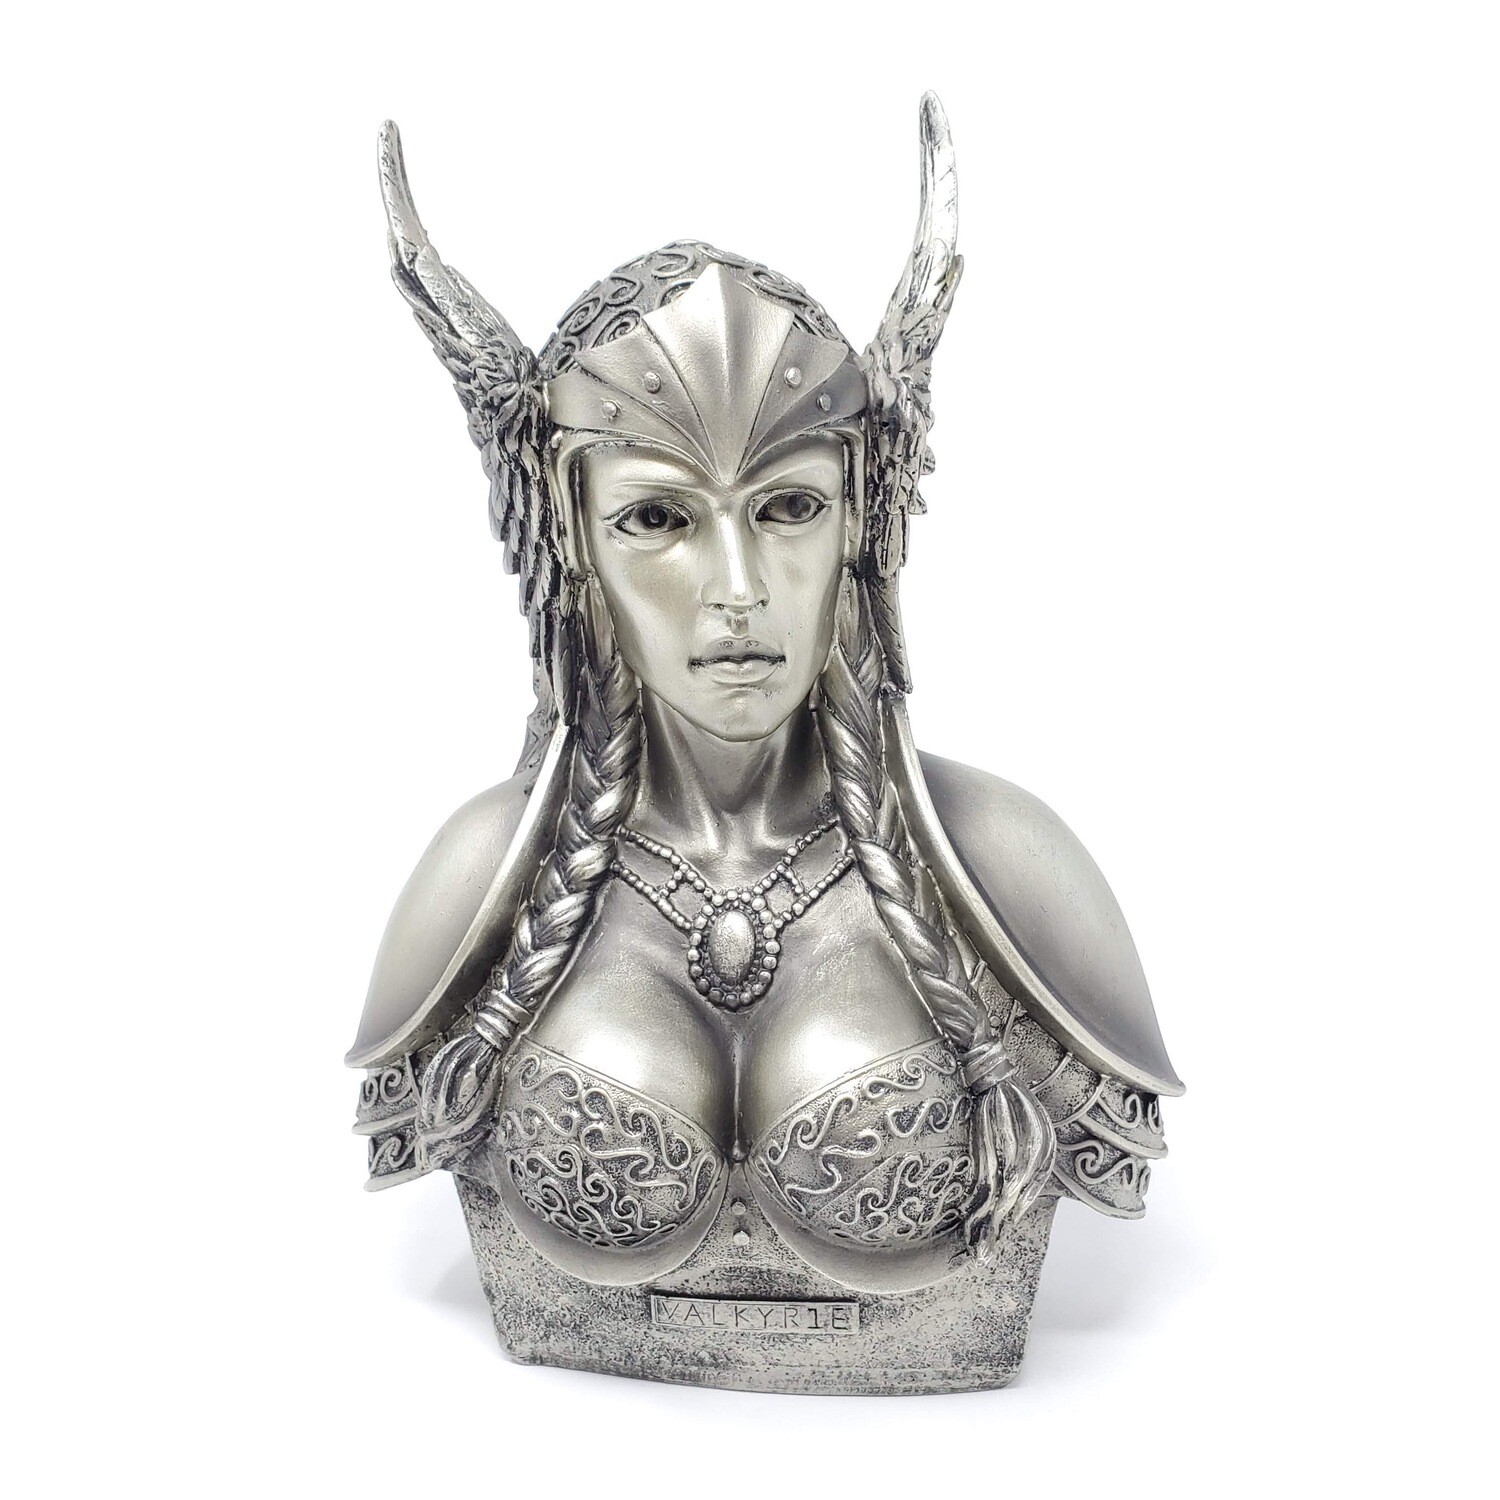 VALKYRIE BUST STATUE